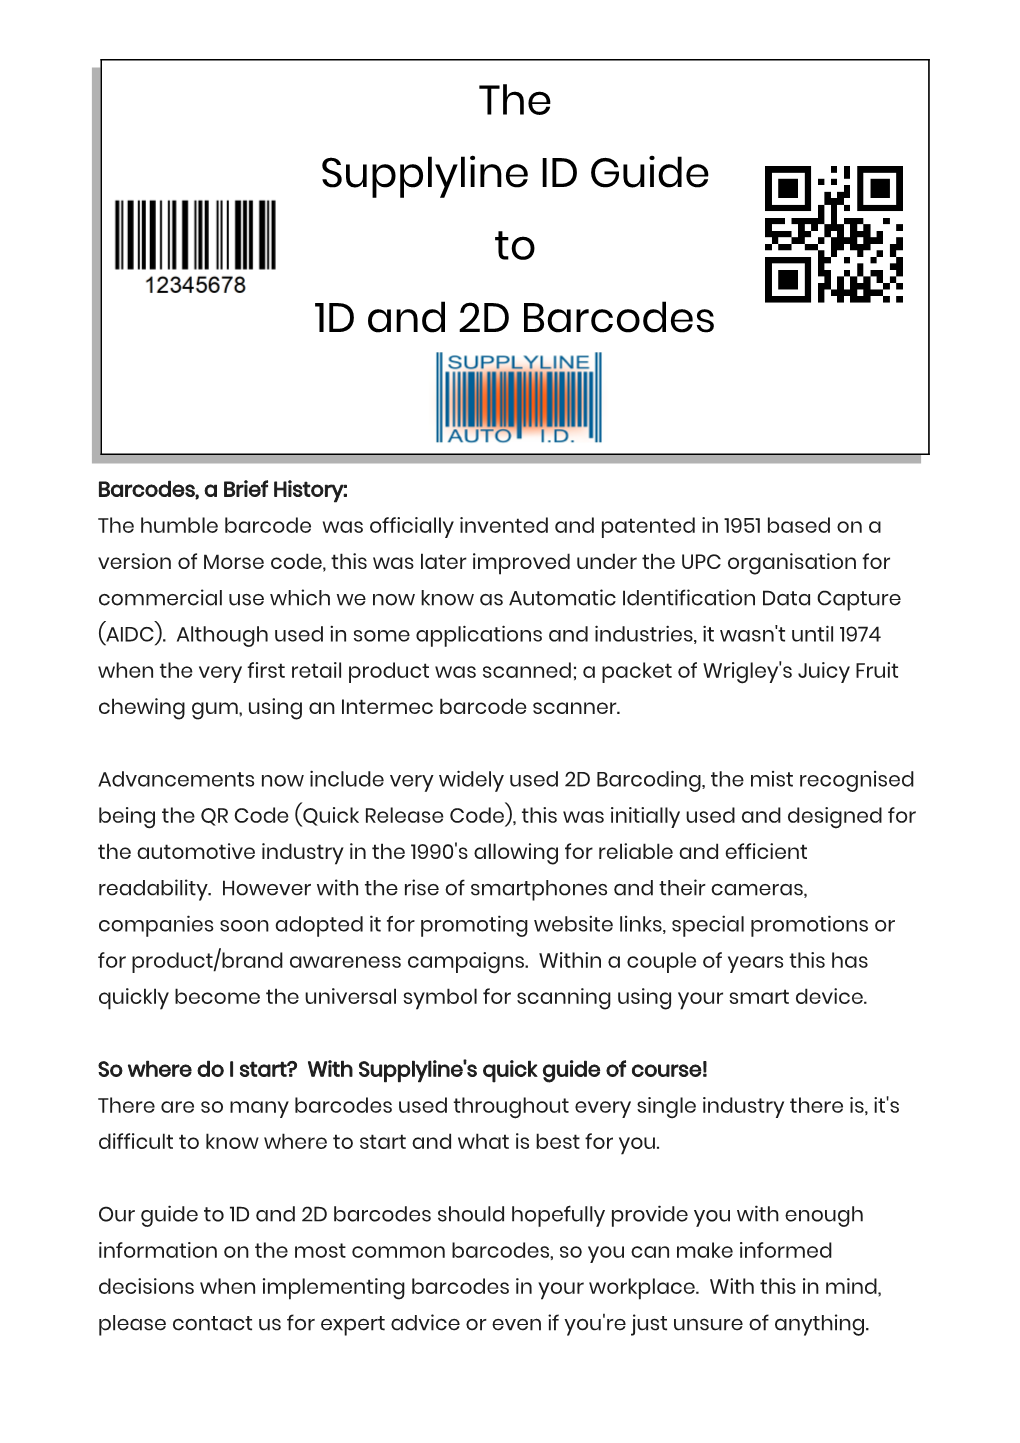 The Supplyline ID Guide to 1D and 2D Barcodes